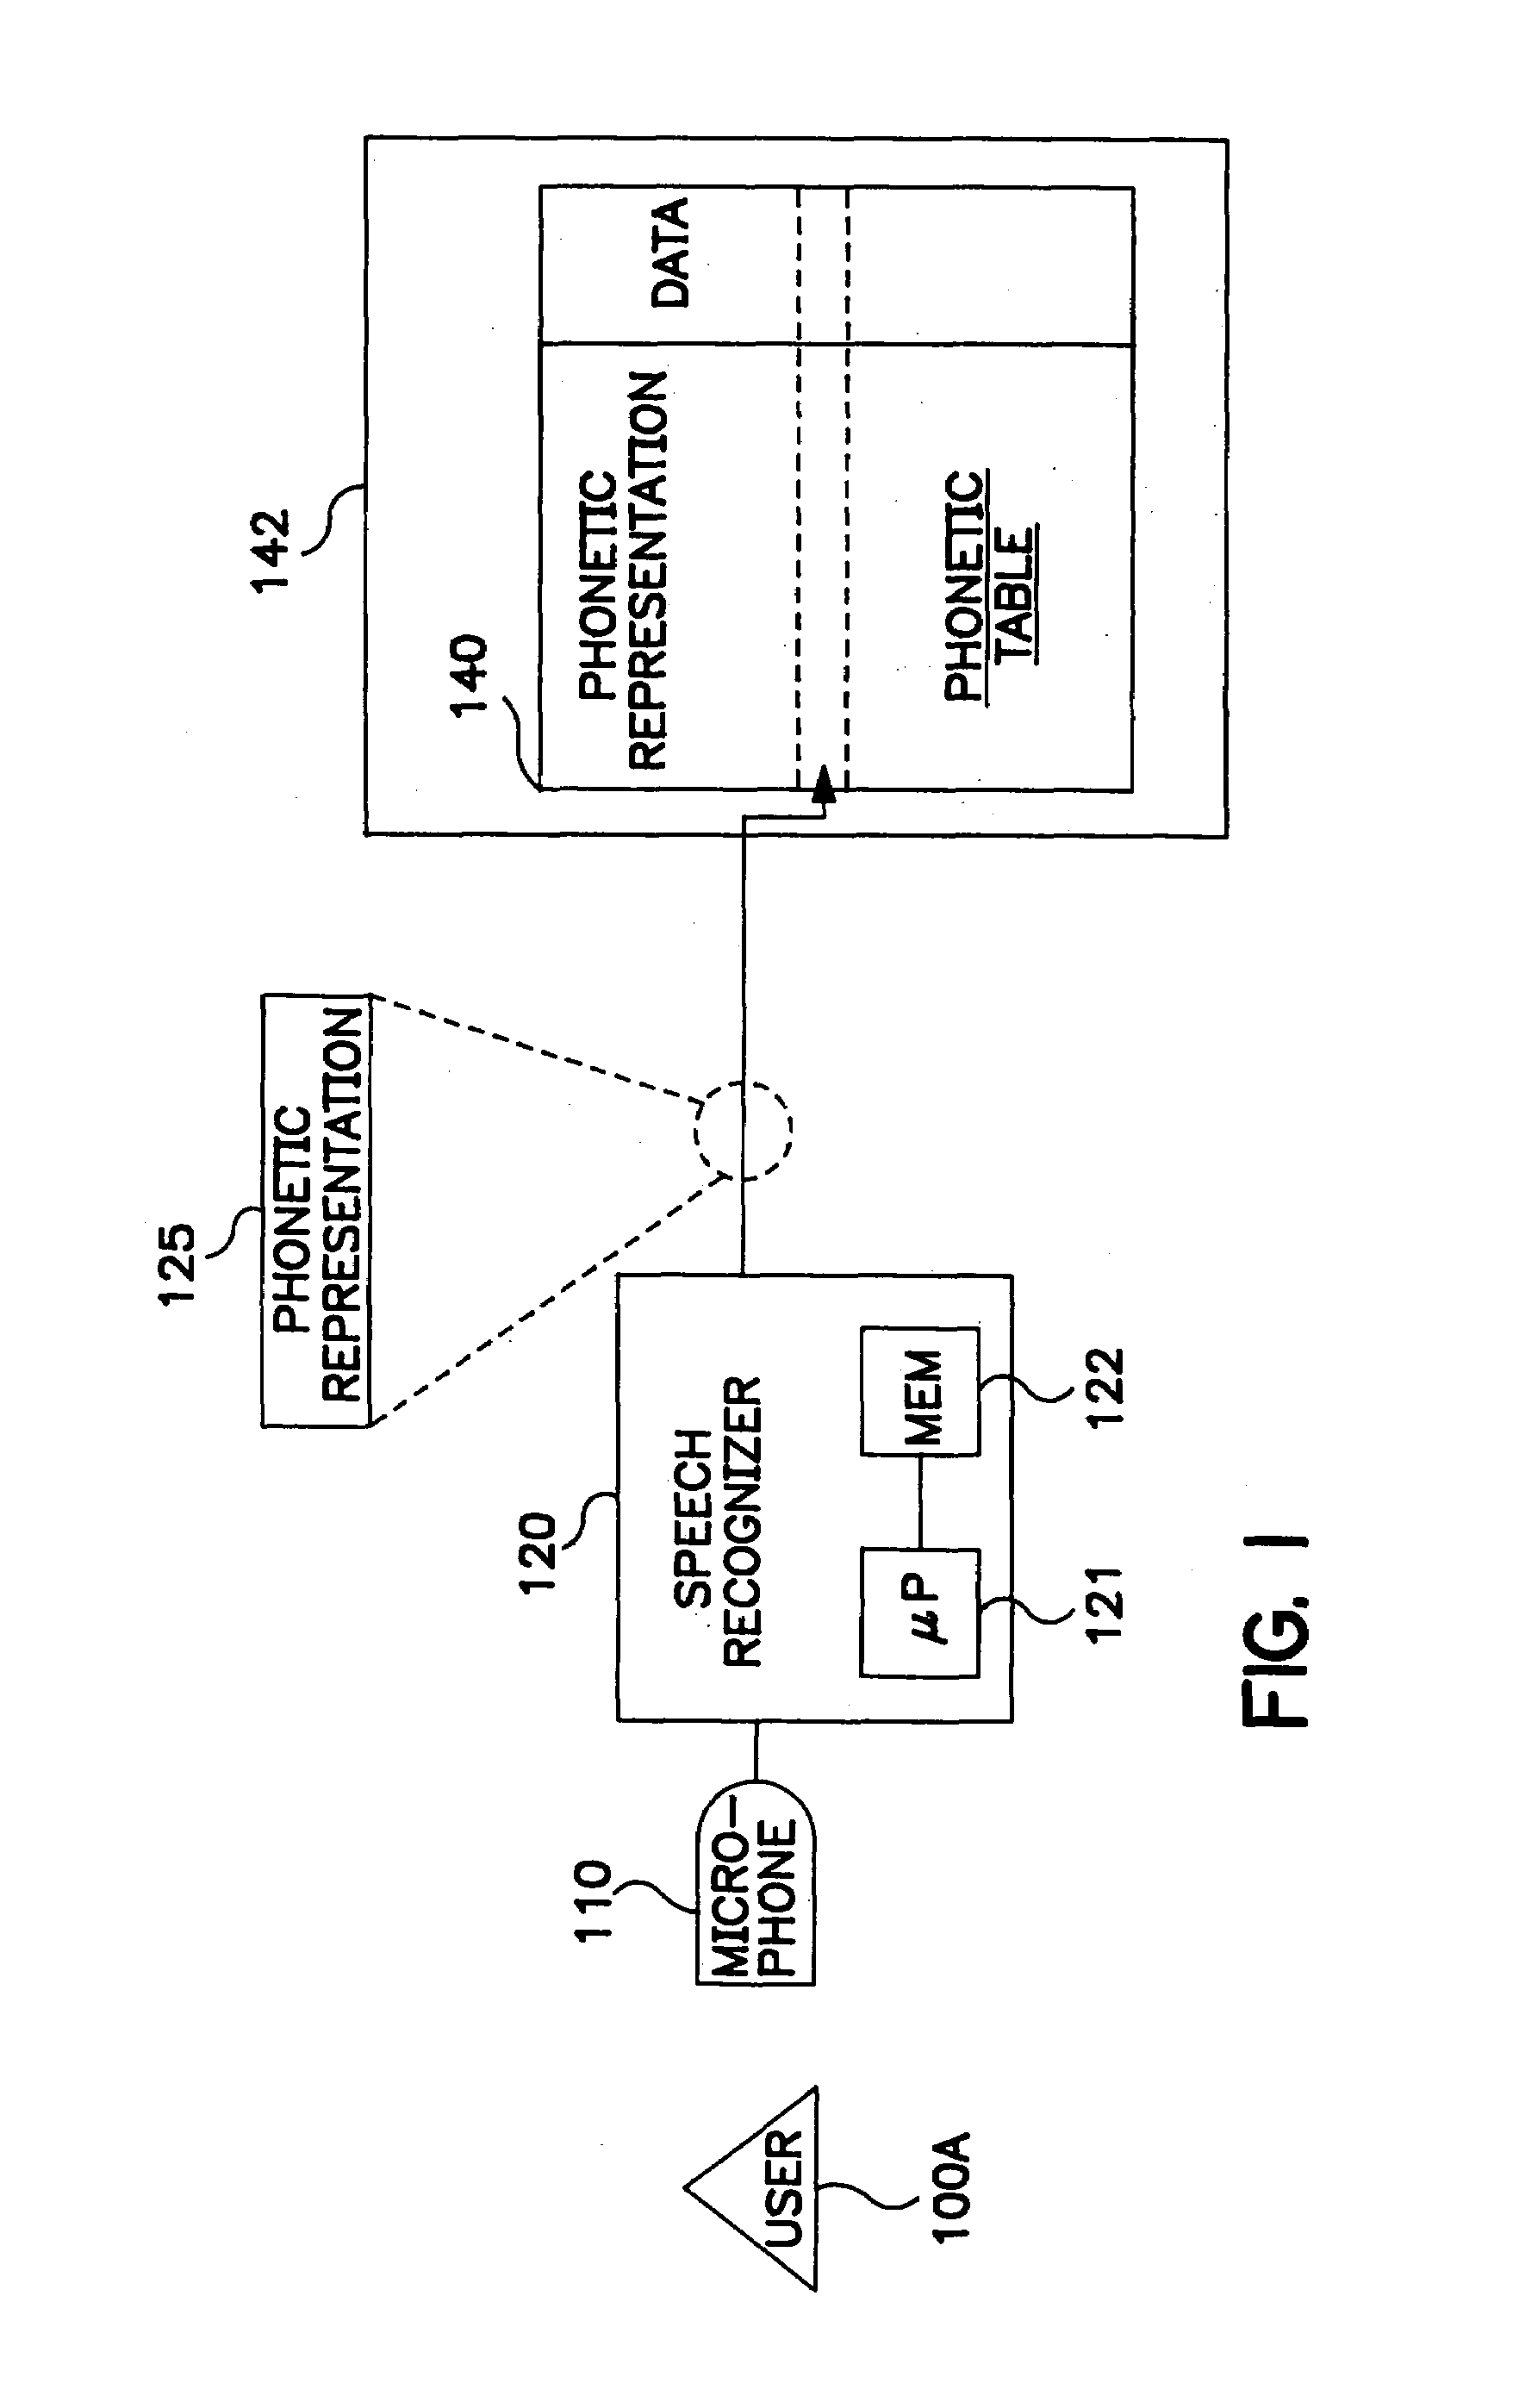 Method and apparatus for voice controlled devices with improved phrase storage, use, conversion, transfer, and recognition